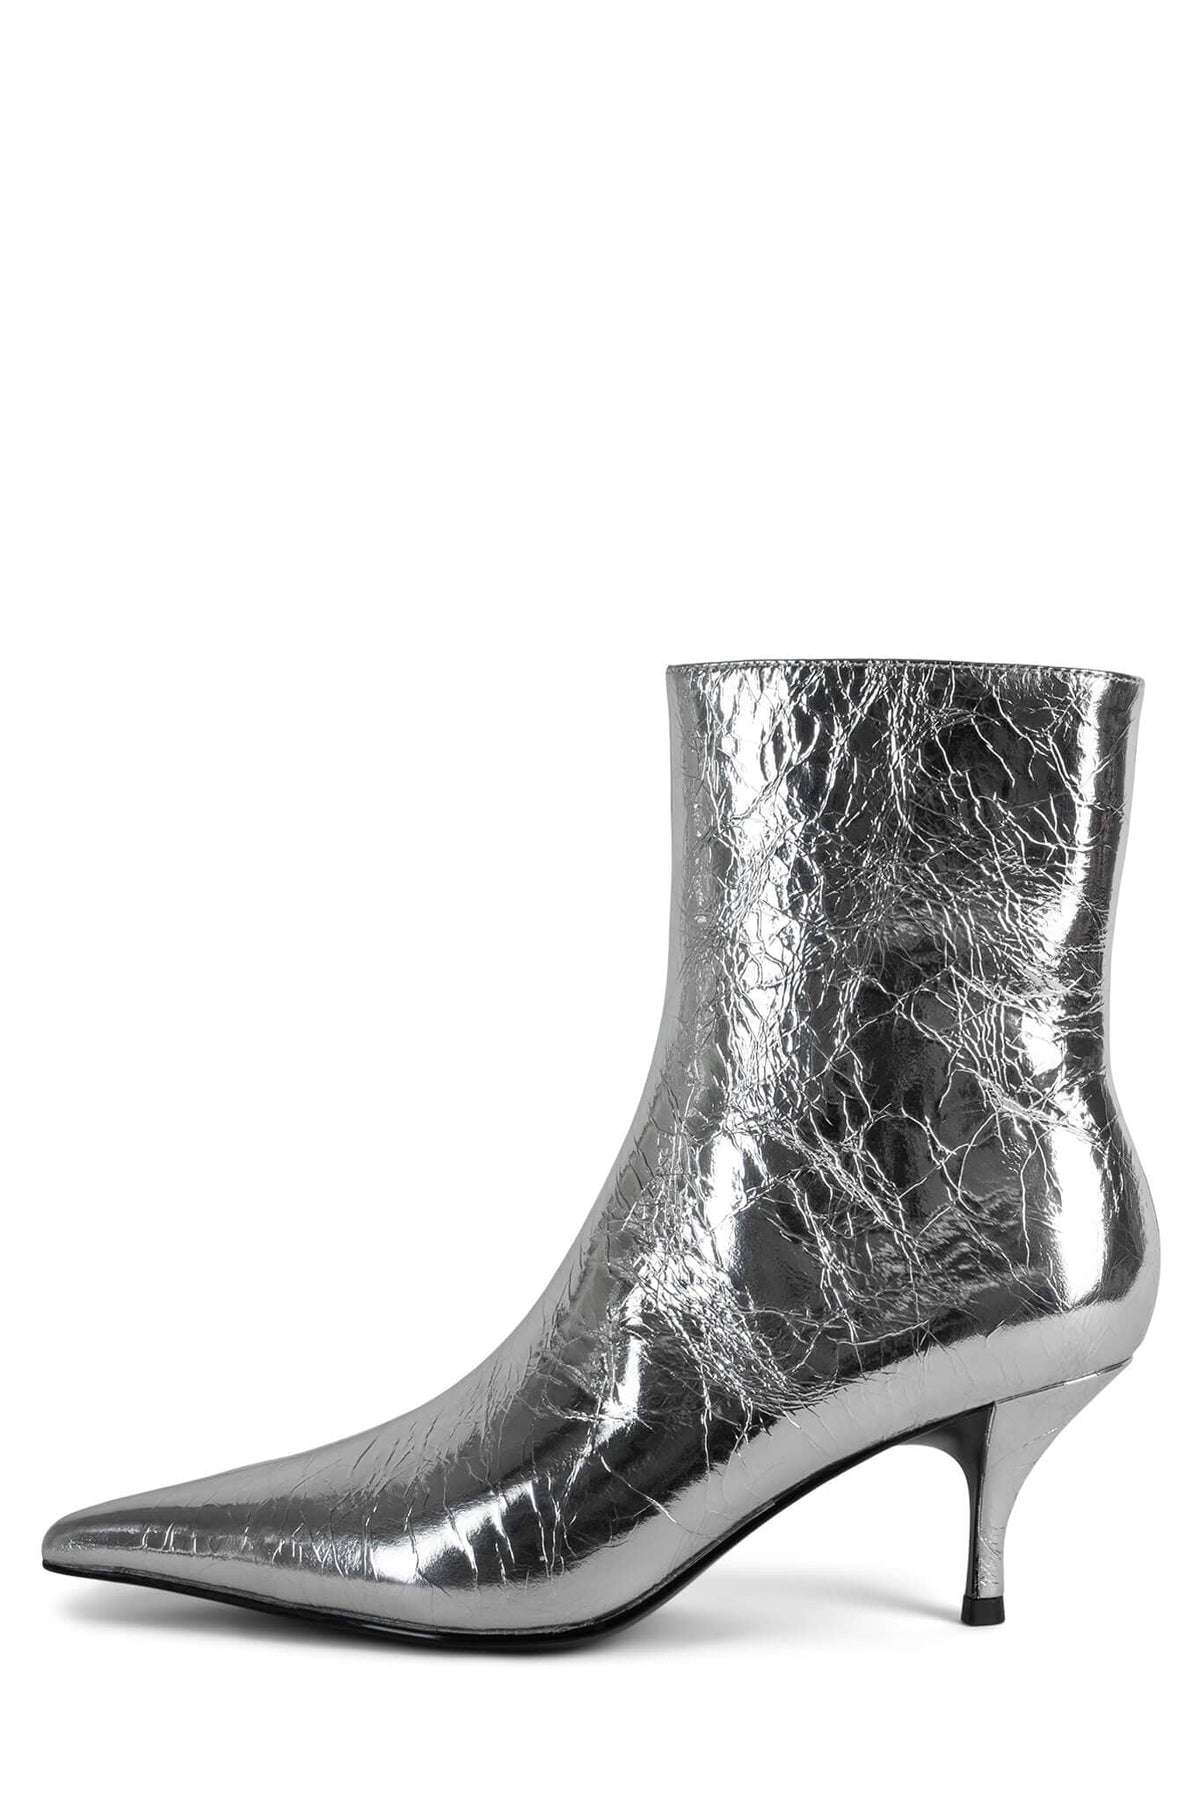 SINDEE Jeffrey Campbell Ankle Booties Silver